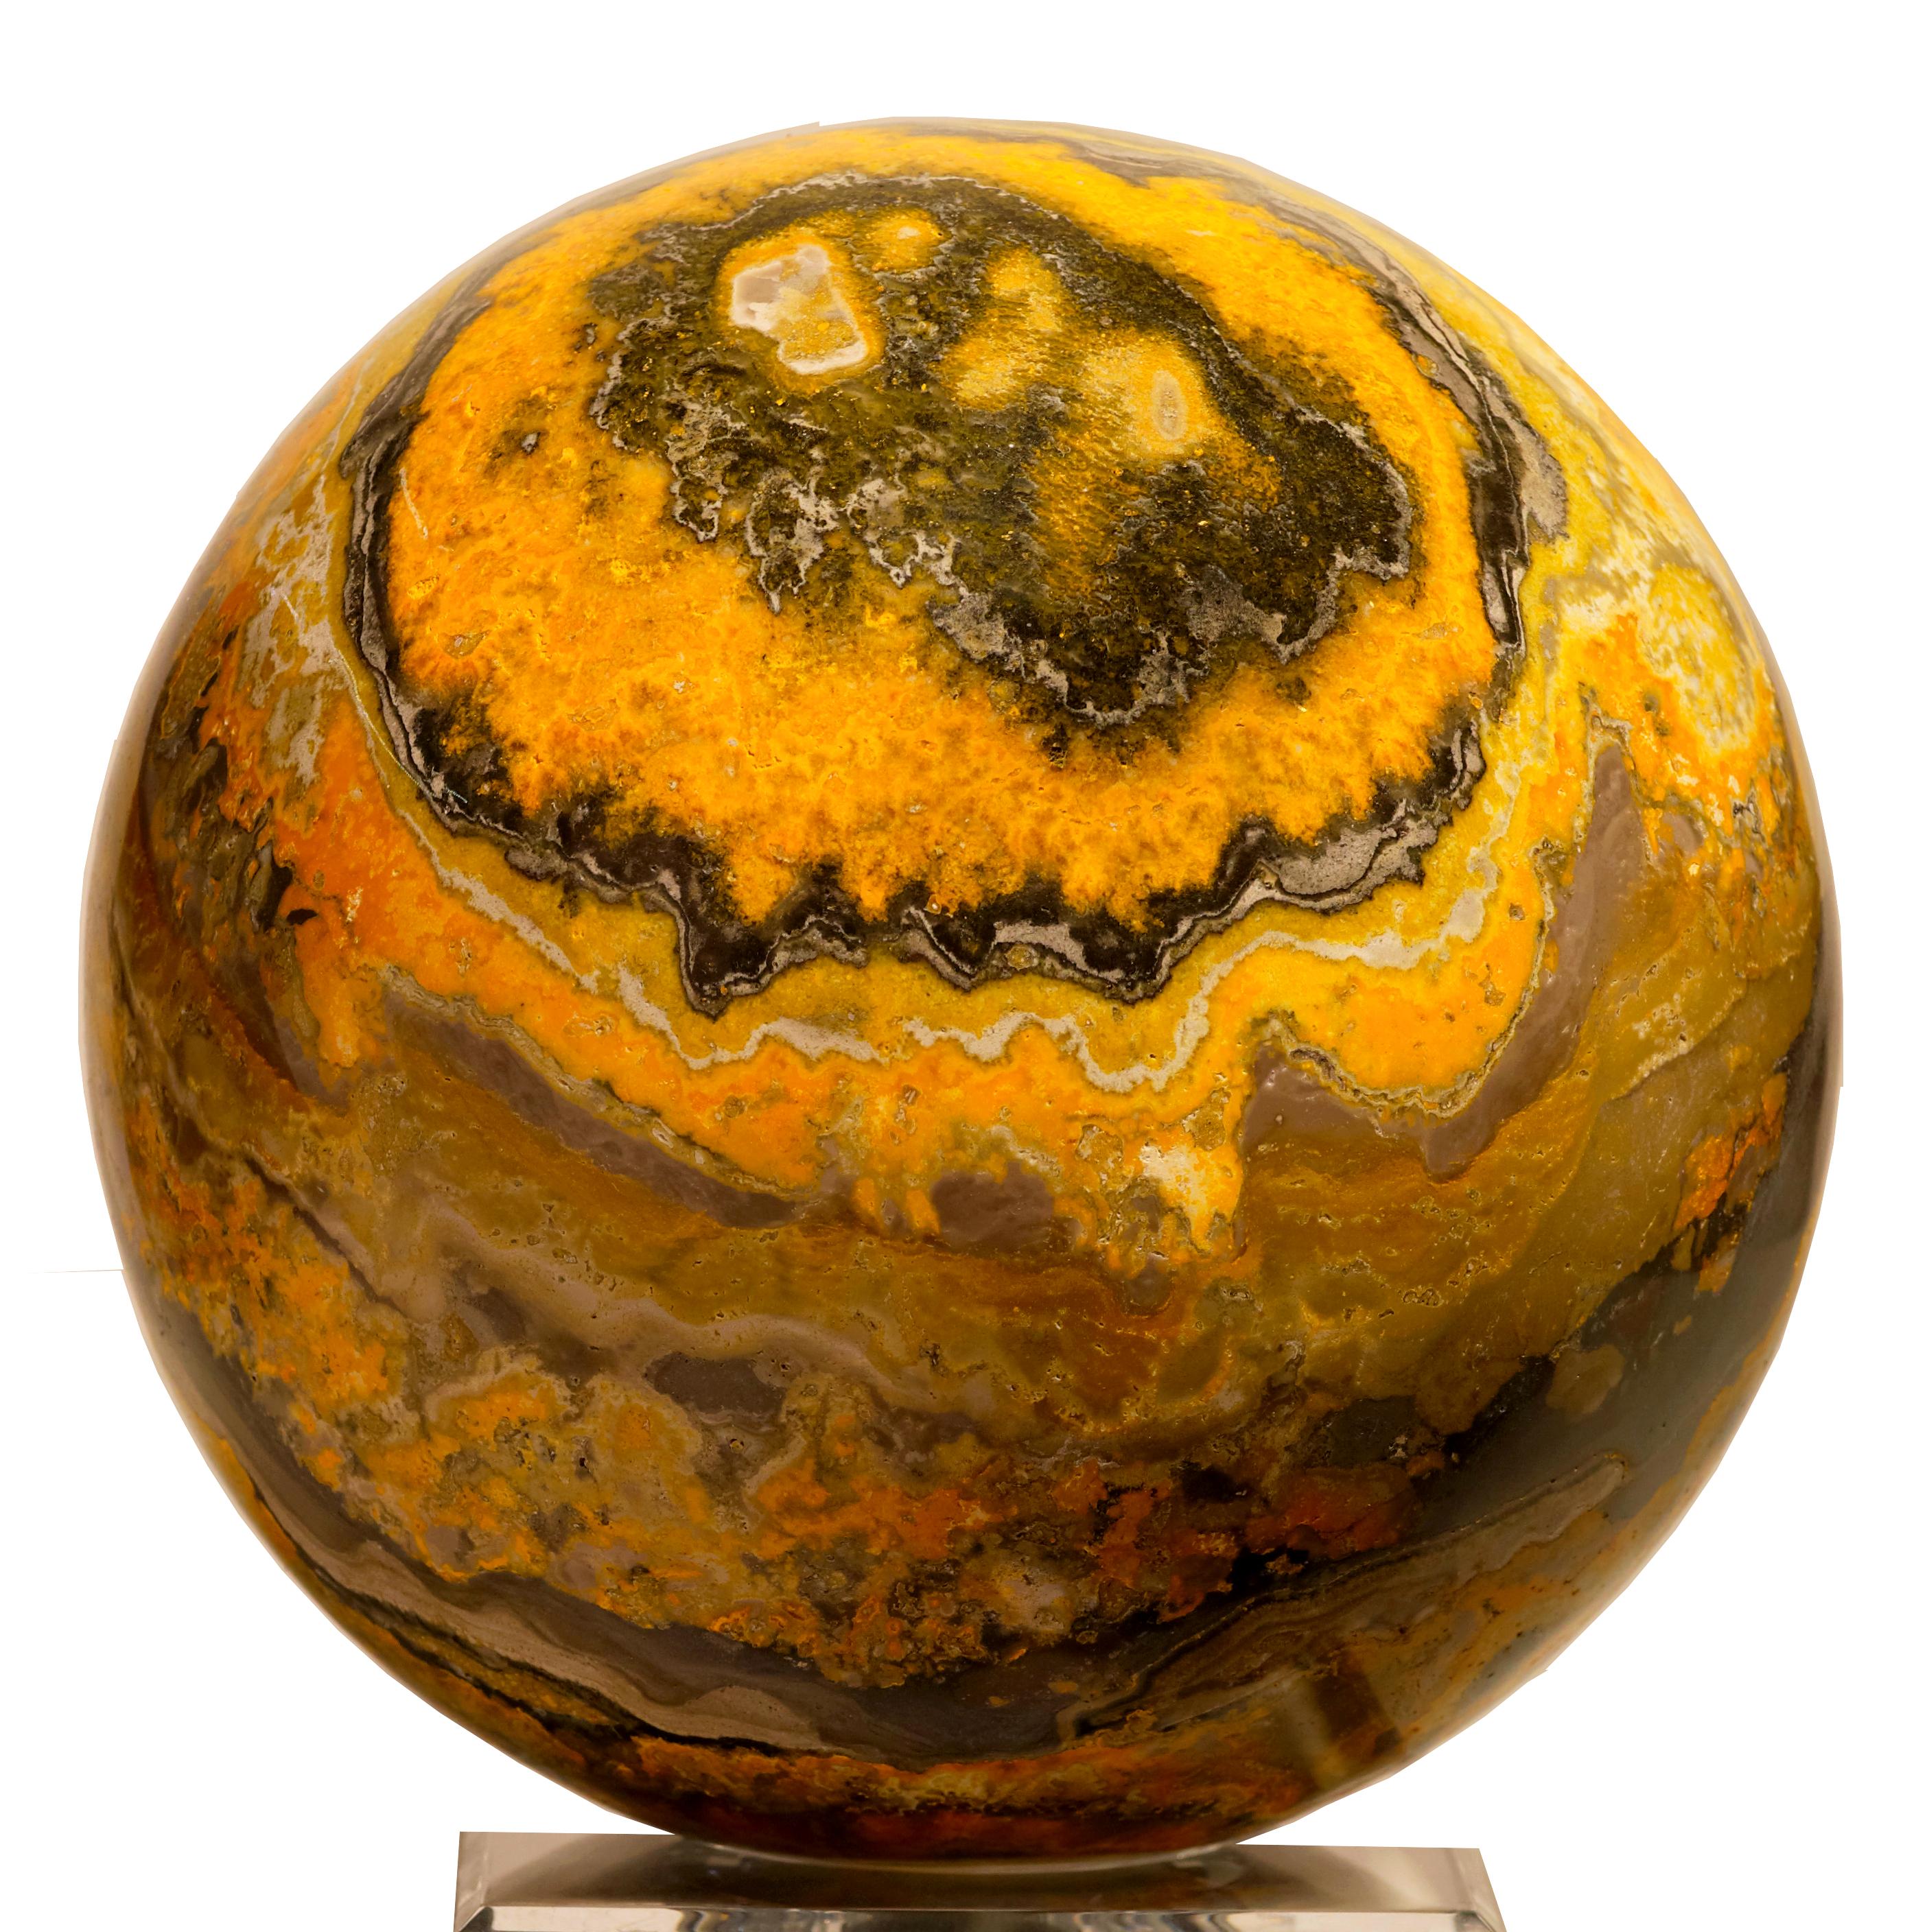 Decorative  Rare type of  Large sphere of Bumblebee Jasper stone. 
Actuallynot a jasper but a mixture of orpiment calcite and opal.  Indonesia

Welcome positive energy into one's interior with this massive and spectacular mounted fluorite slice with